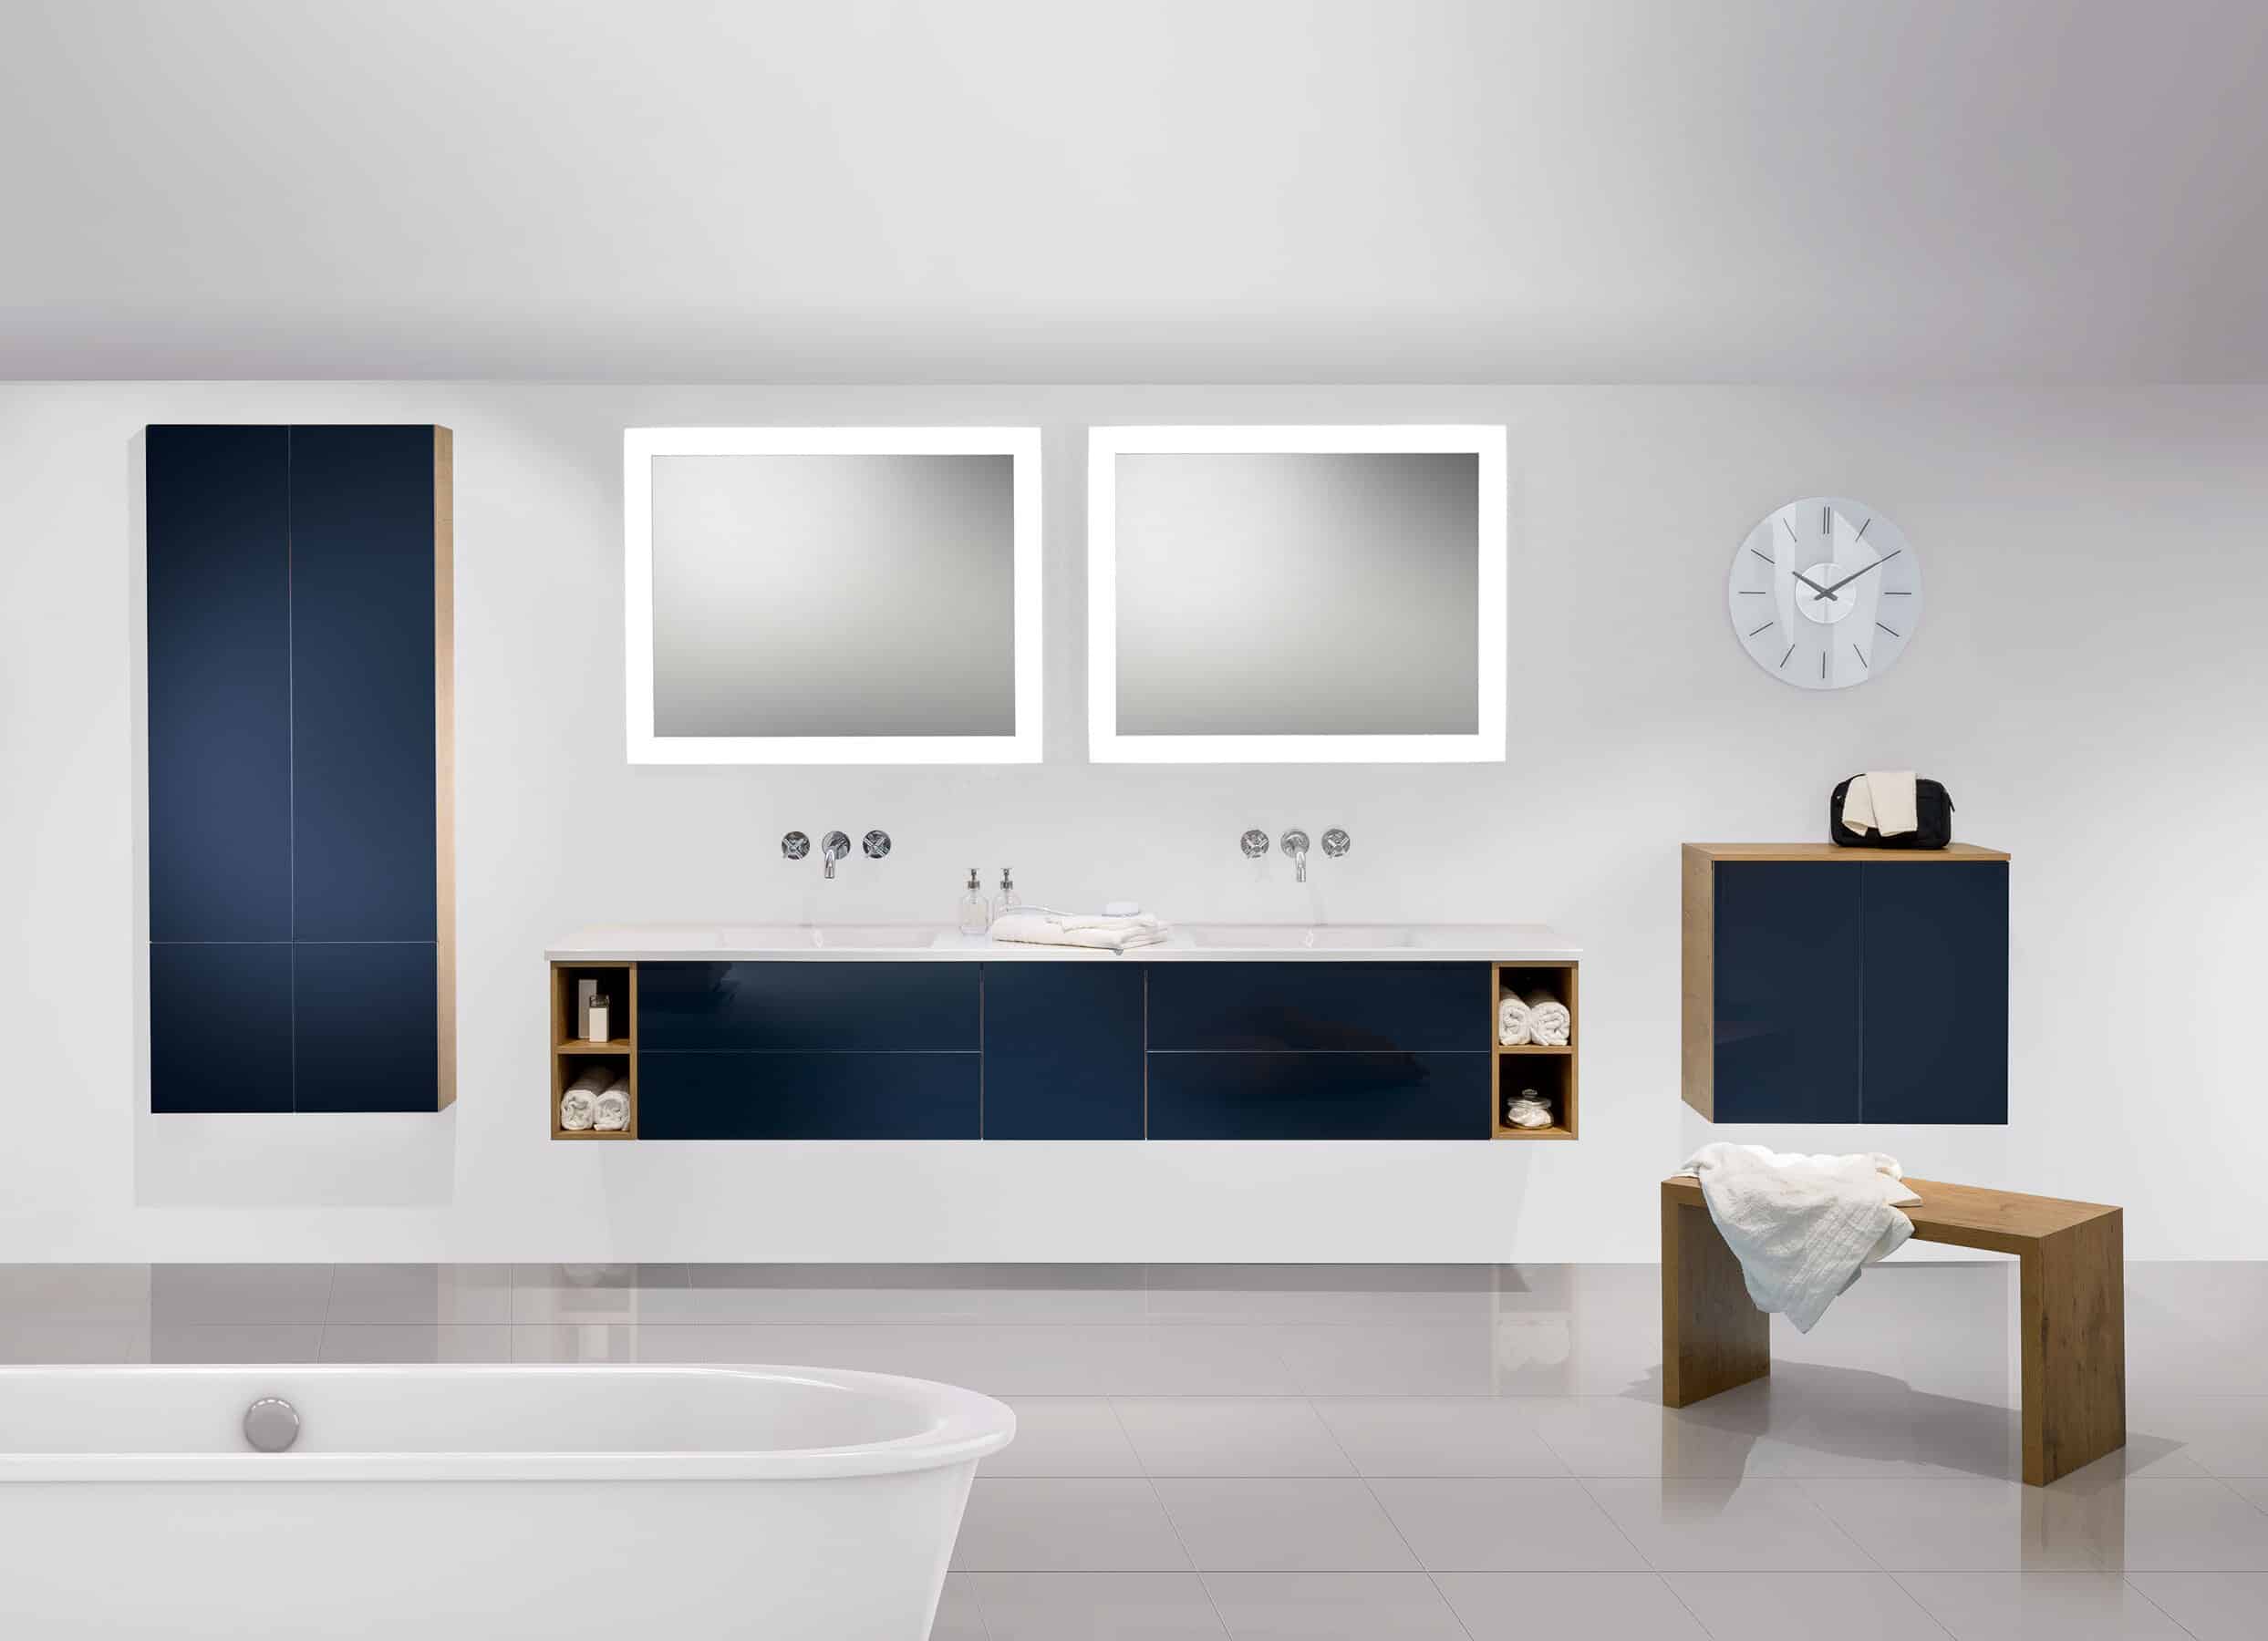 Badea bathroom vanity includes modern design features like these innovative basins and storage.